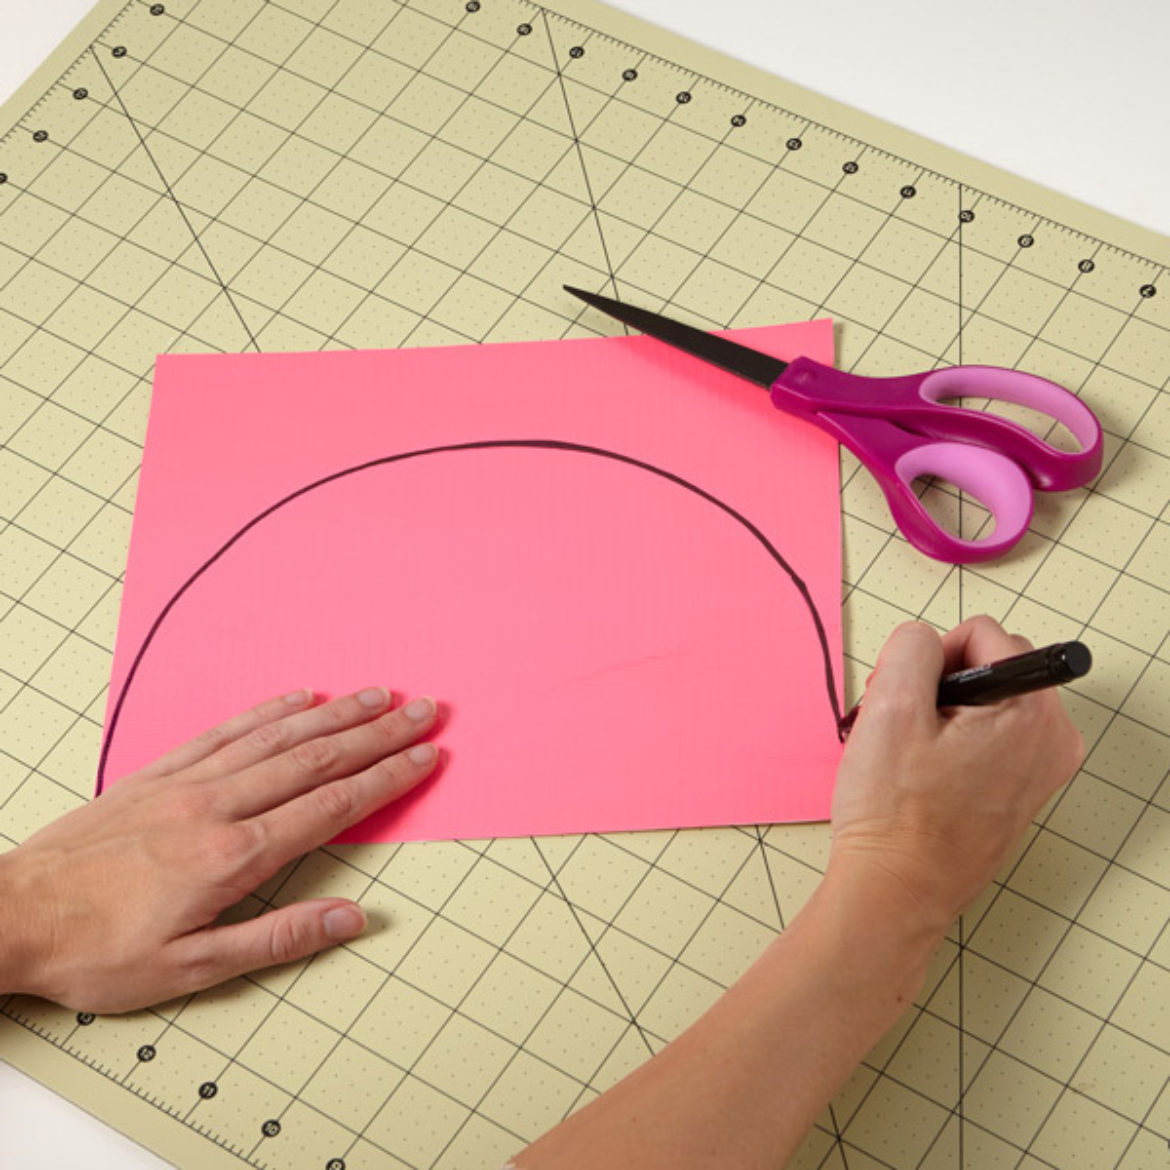 Half circle being drawn on a pink sheet of Duck Tape fabric